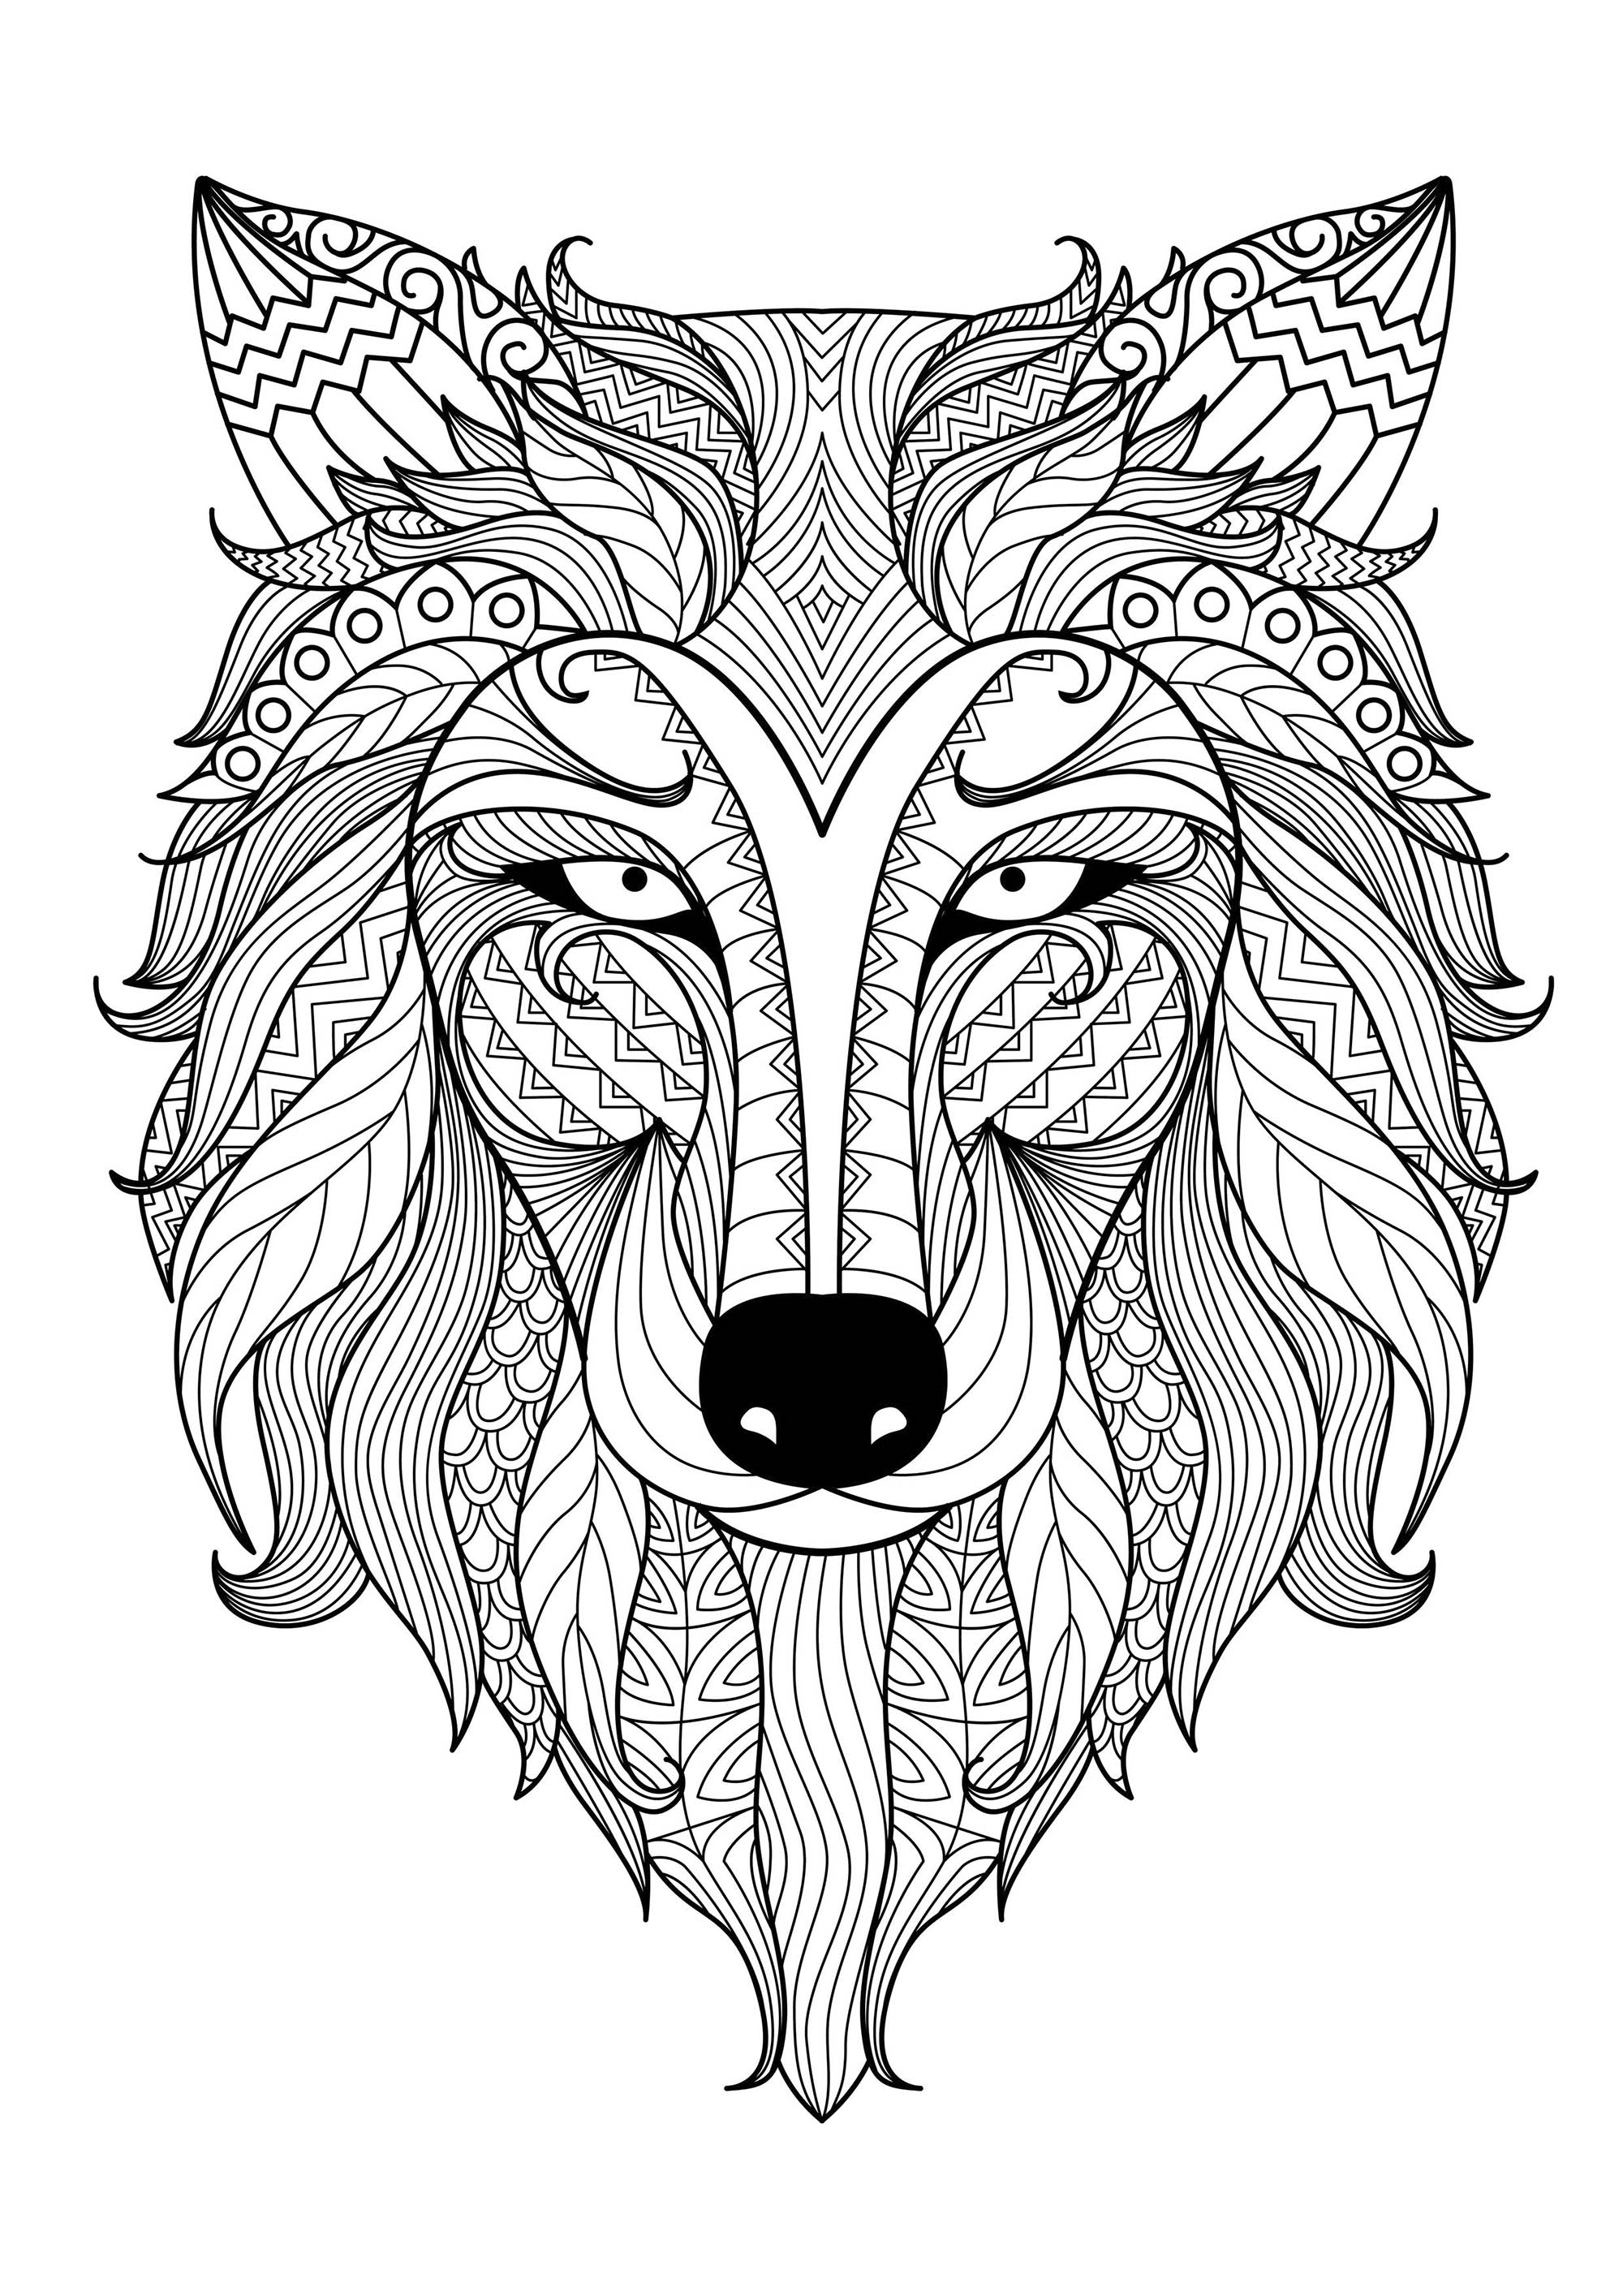 Incredible wolf - Wolves Adult Coloring Pages